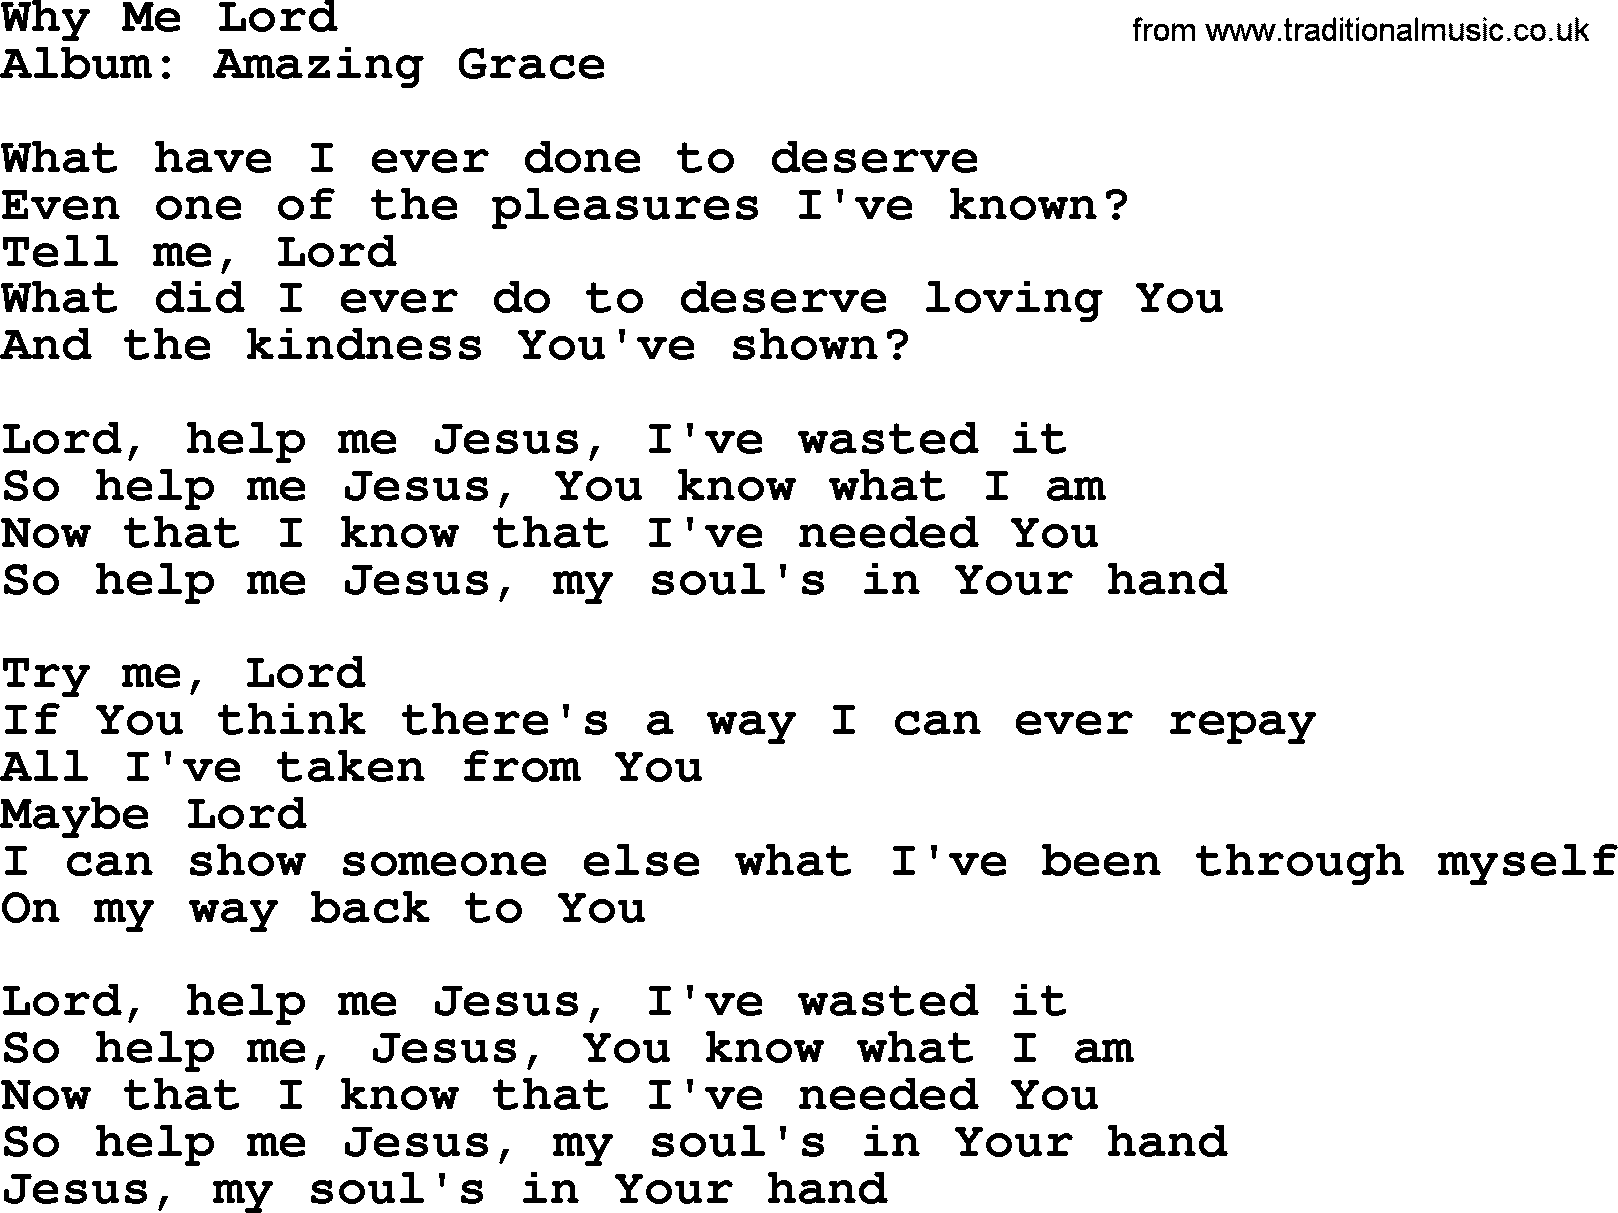 Why Me Lord by George Jones - Counrty song lyrics